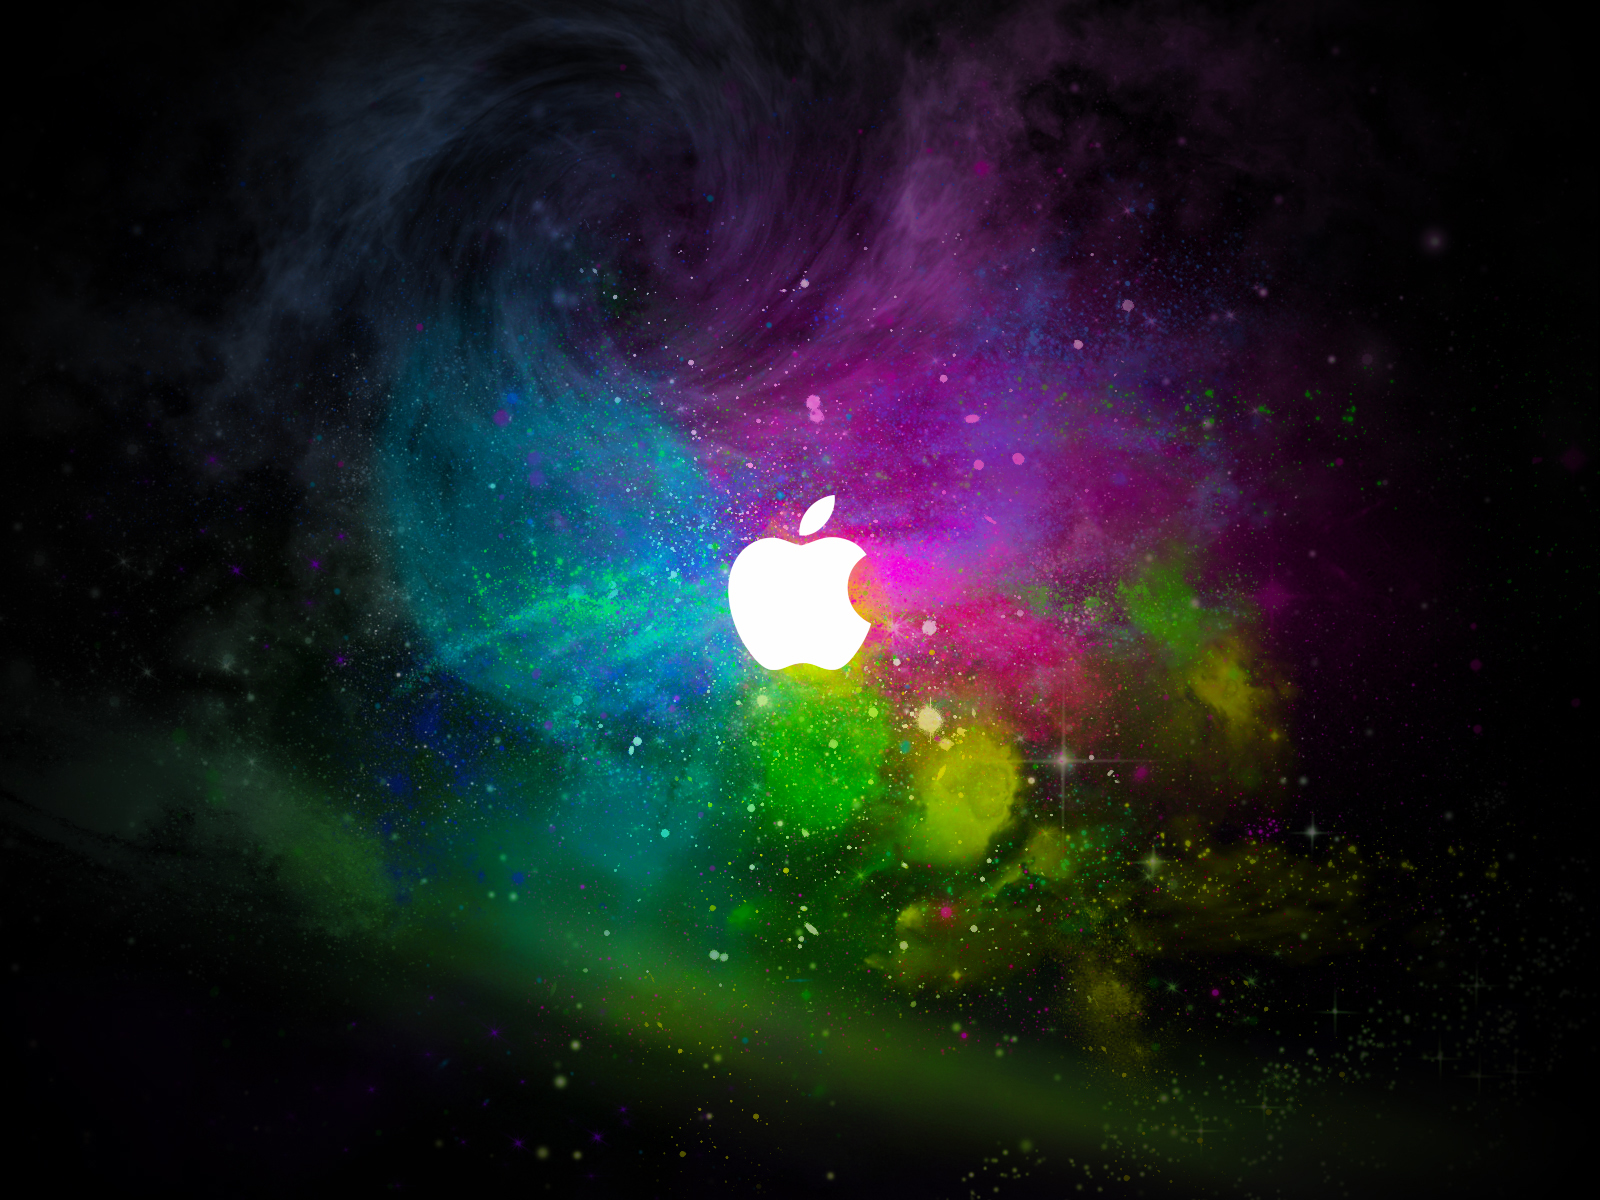 Features of Apple OS X Yosemite that might not work on all Mac devices